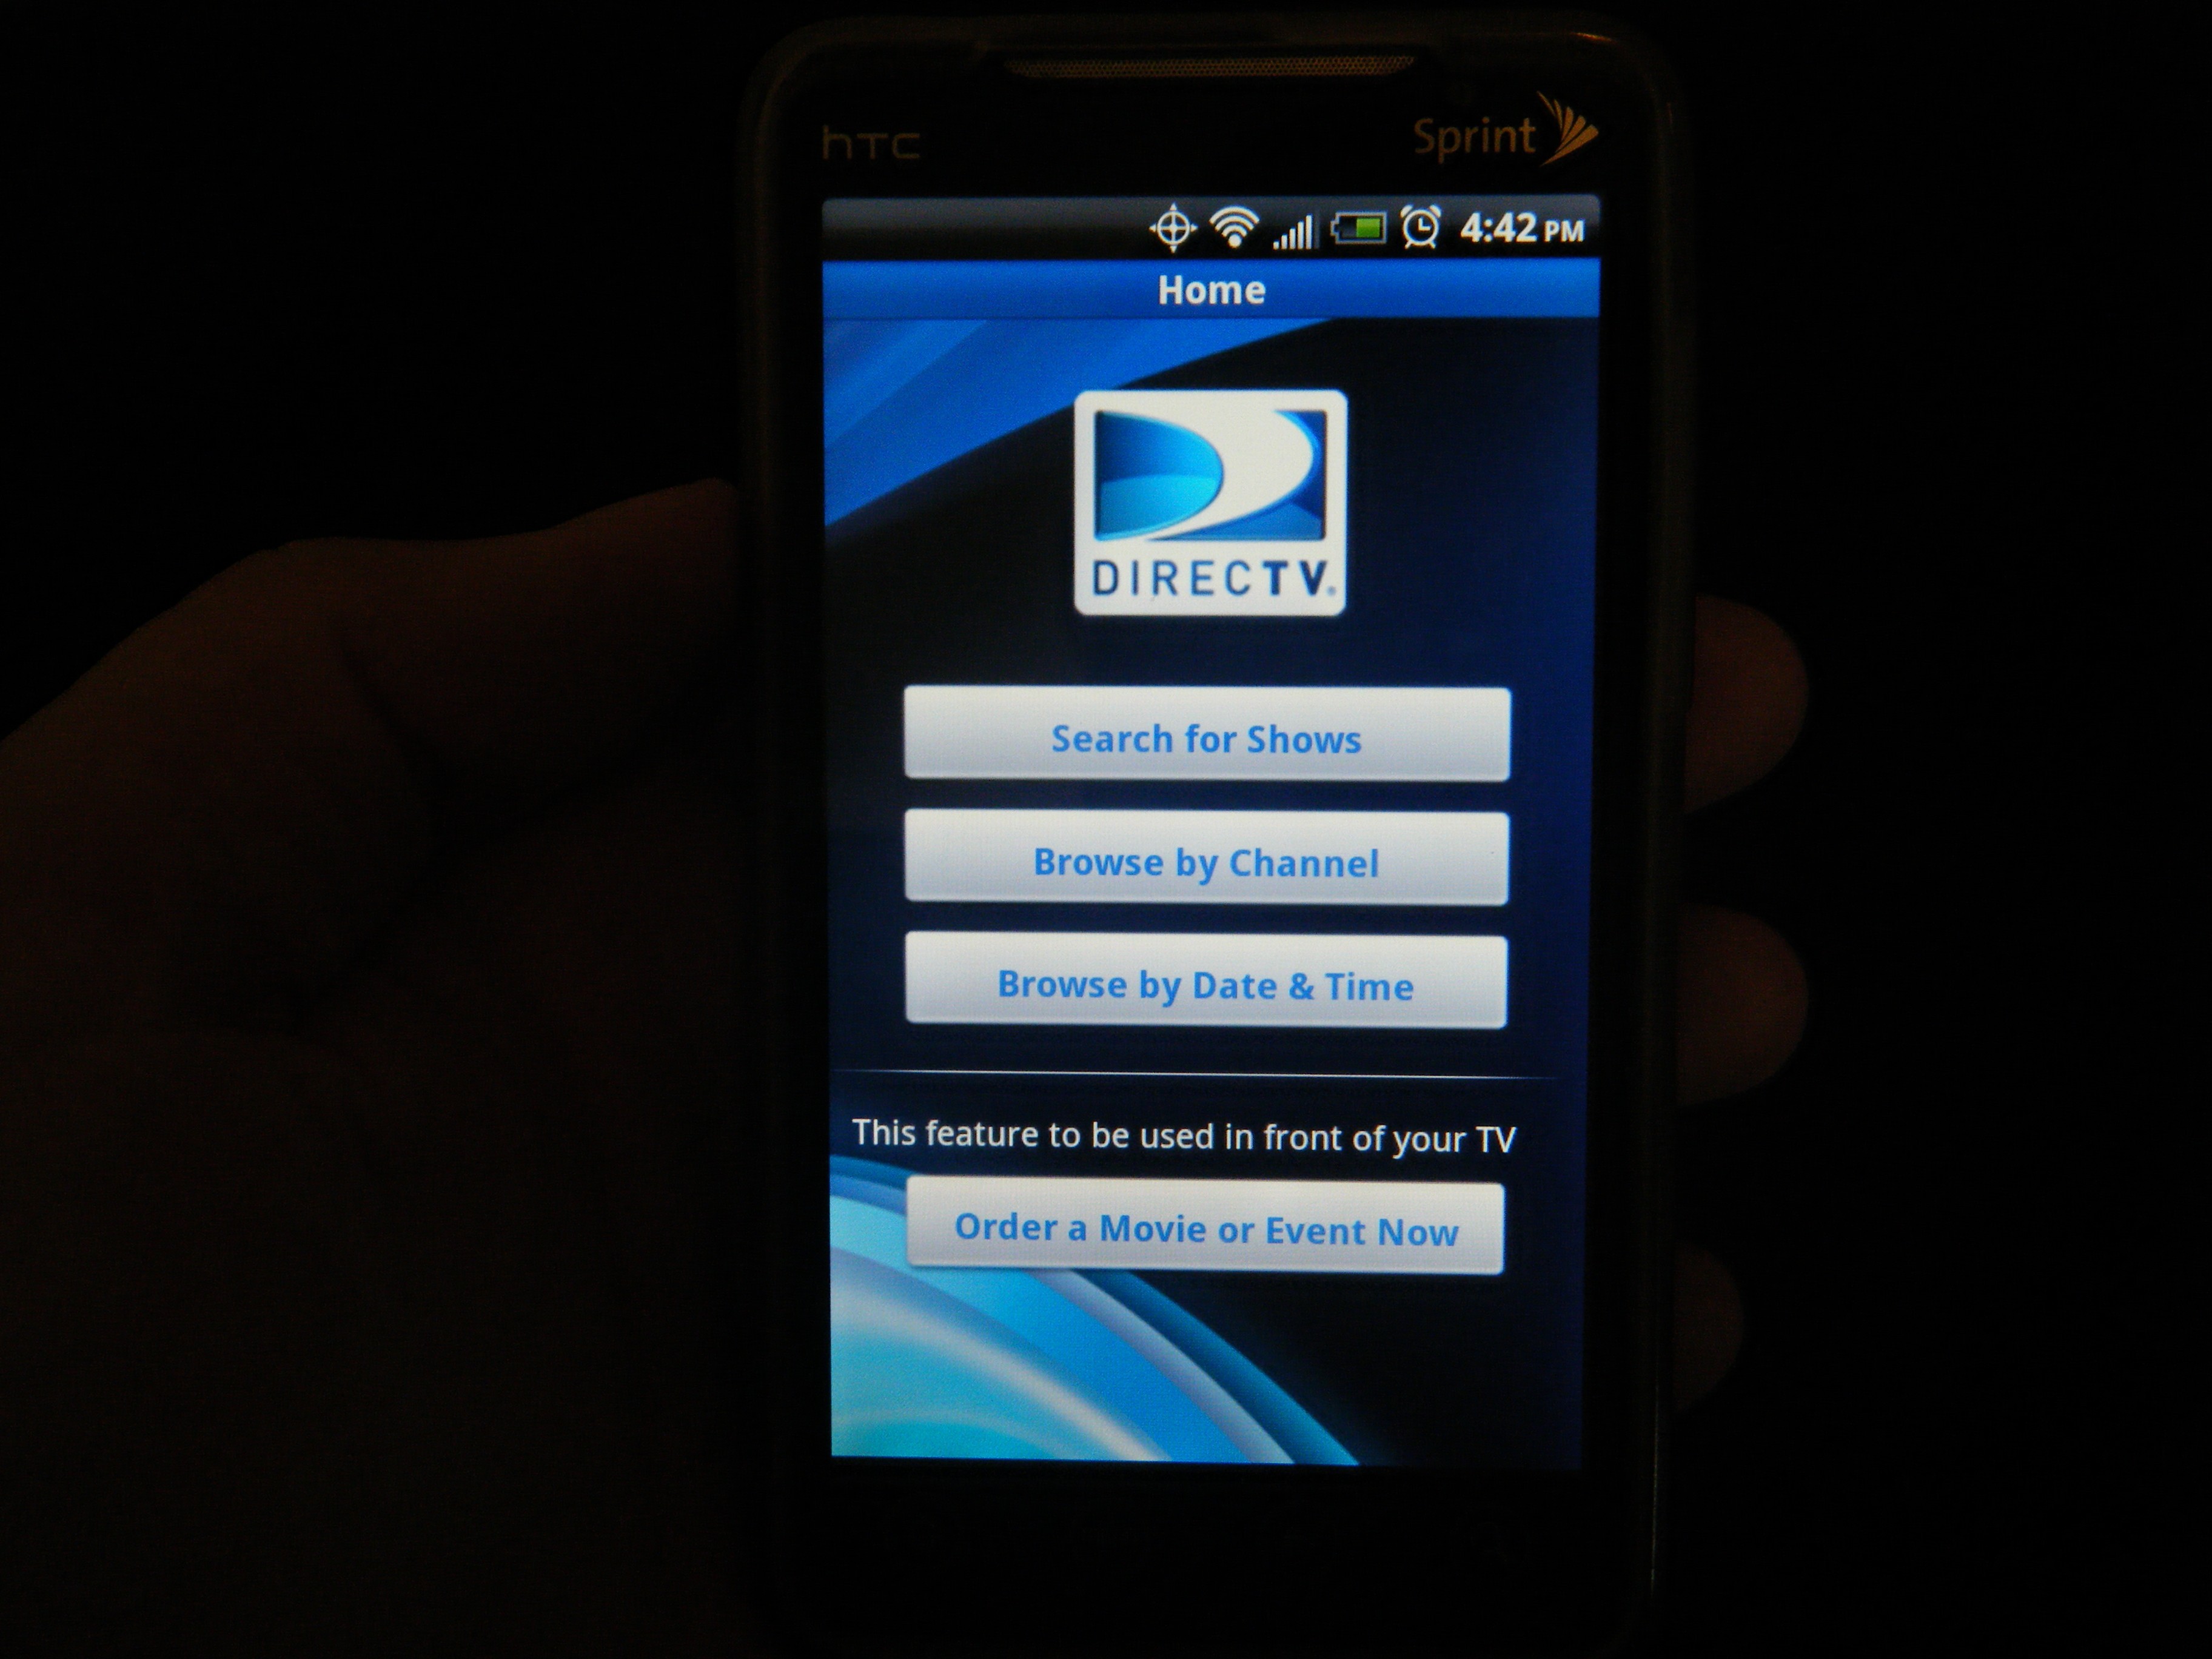 DIRECTV for Android